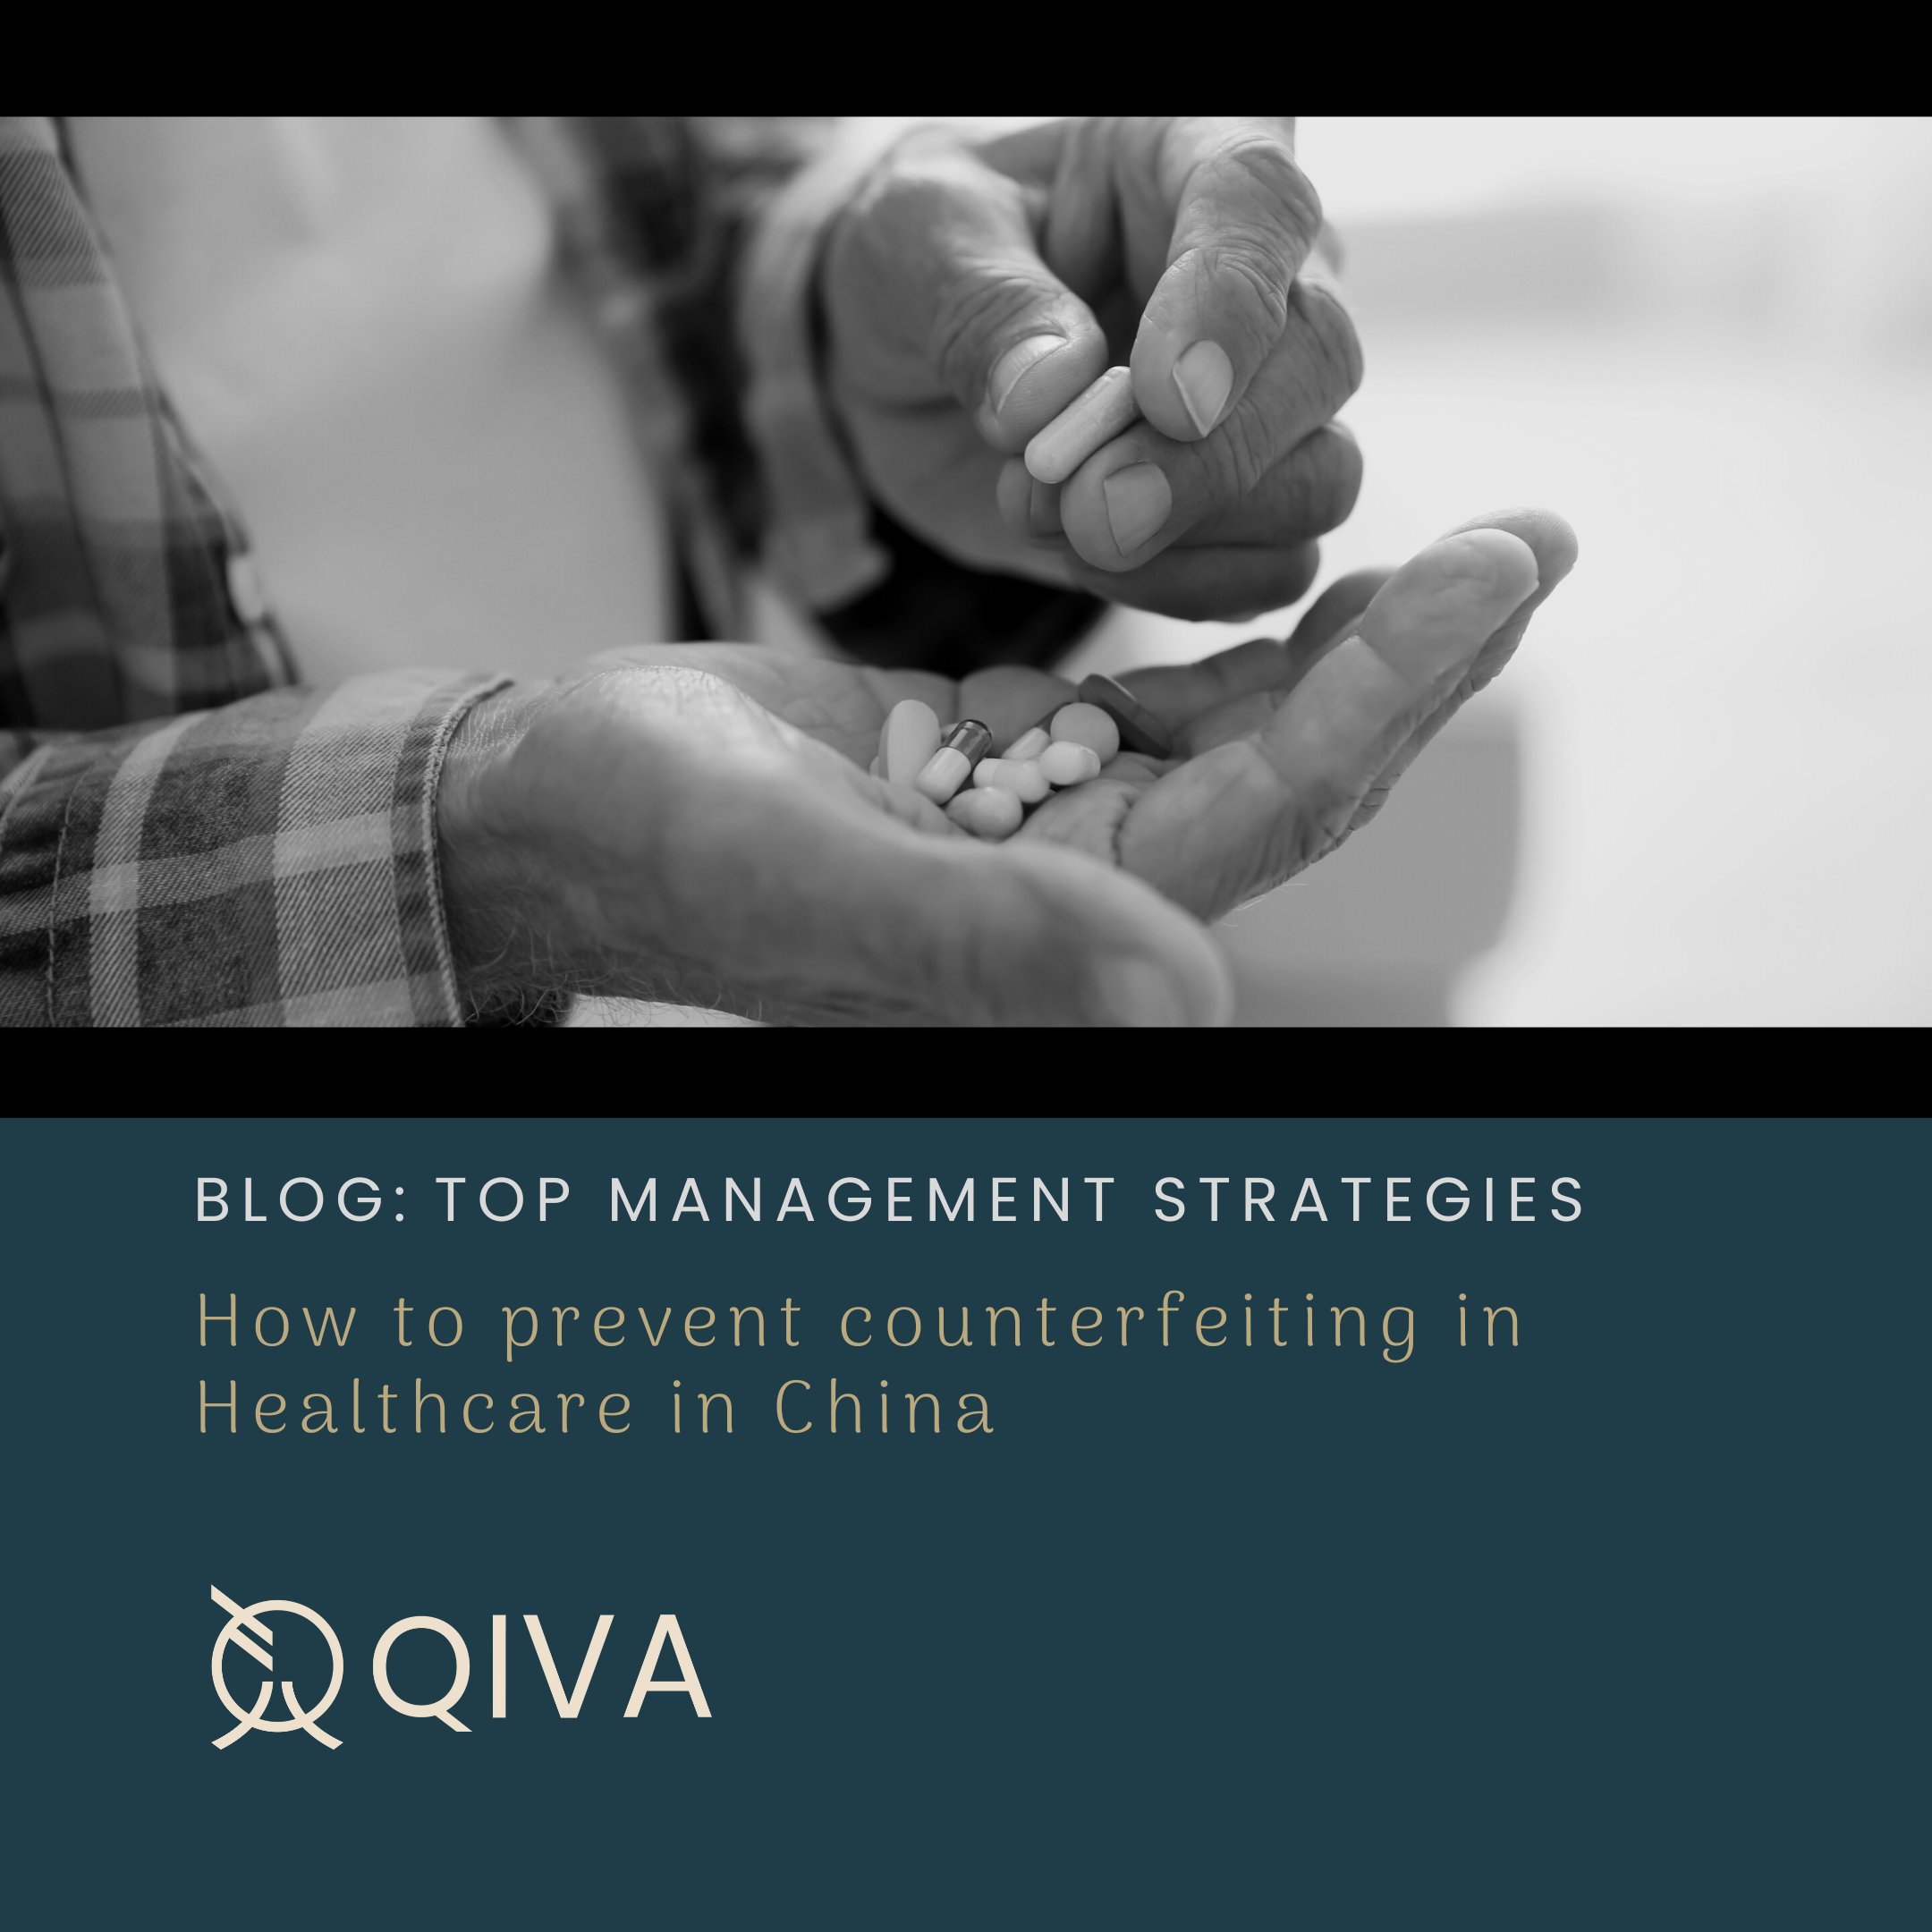 How to prevent counterfeiting in Healthcare in China: our top management strategies